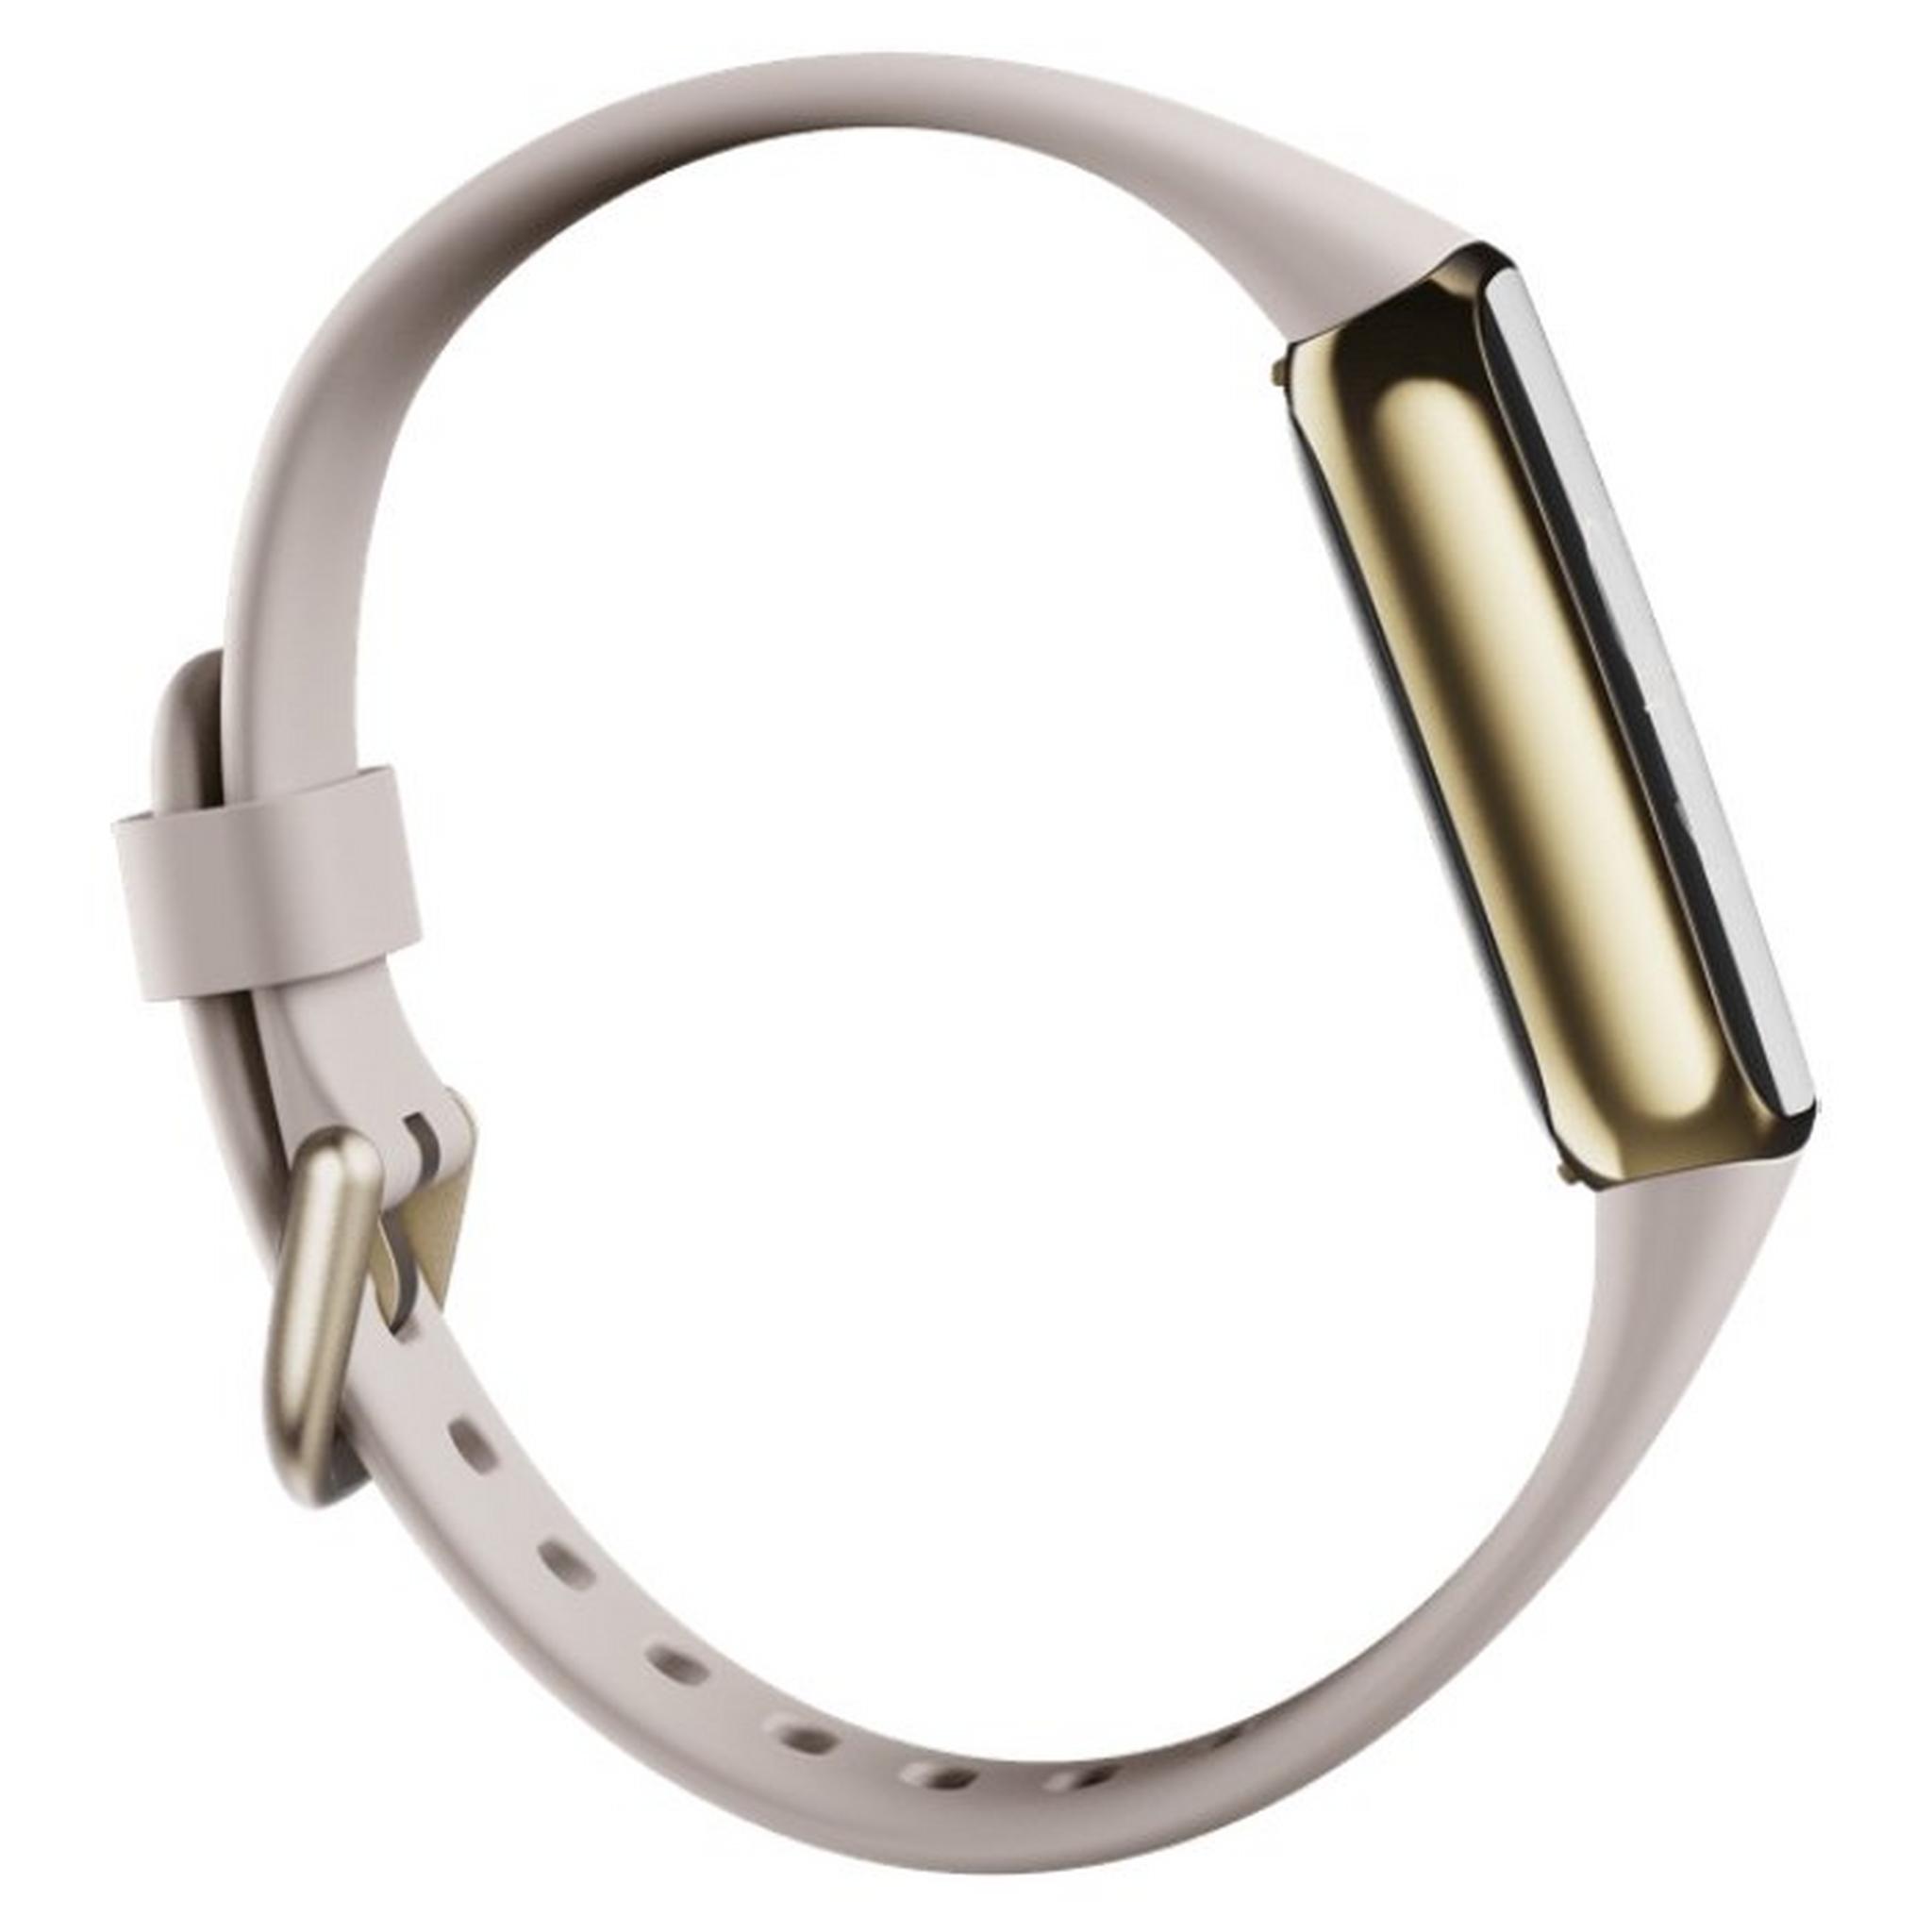 Fitbit Luxe Activity Tracker - Soft Gold/White